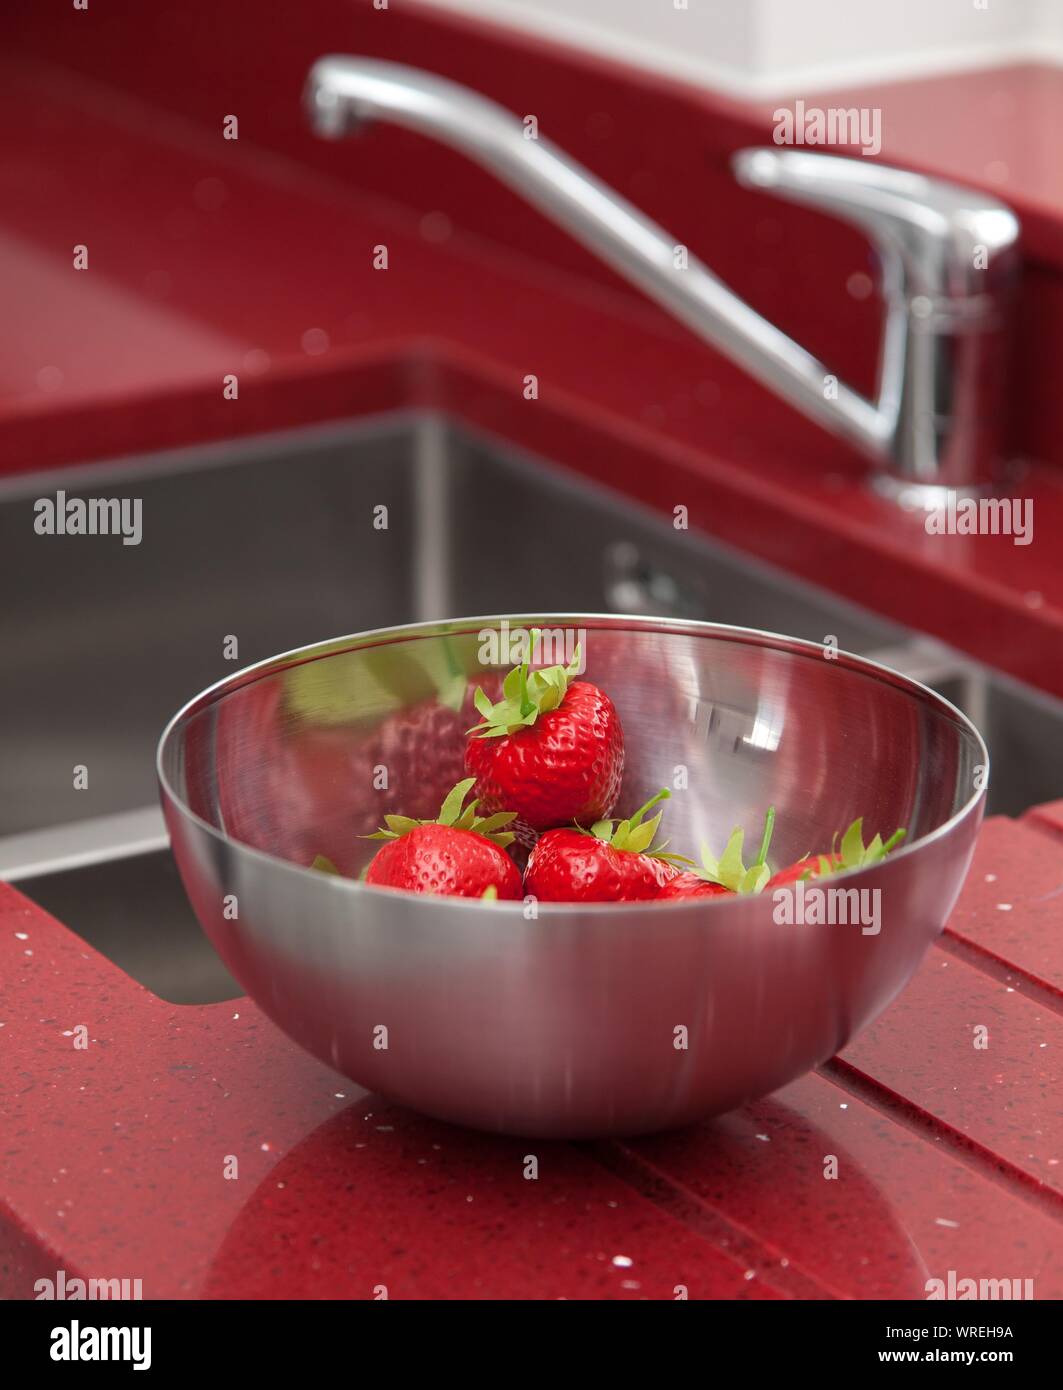 Strawberries in a stainless steel bowl beside a kitchen sink set into bright red worktop. Stock Photo